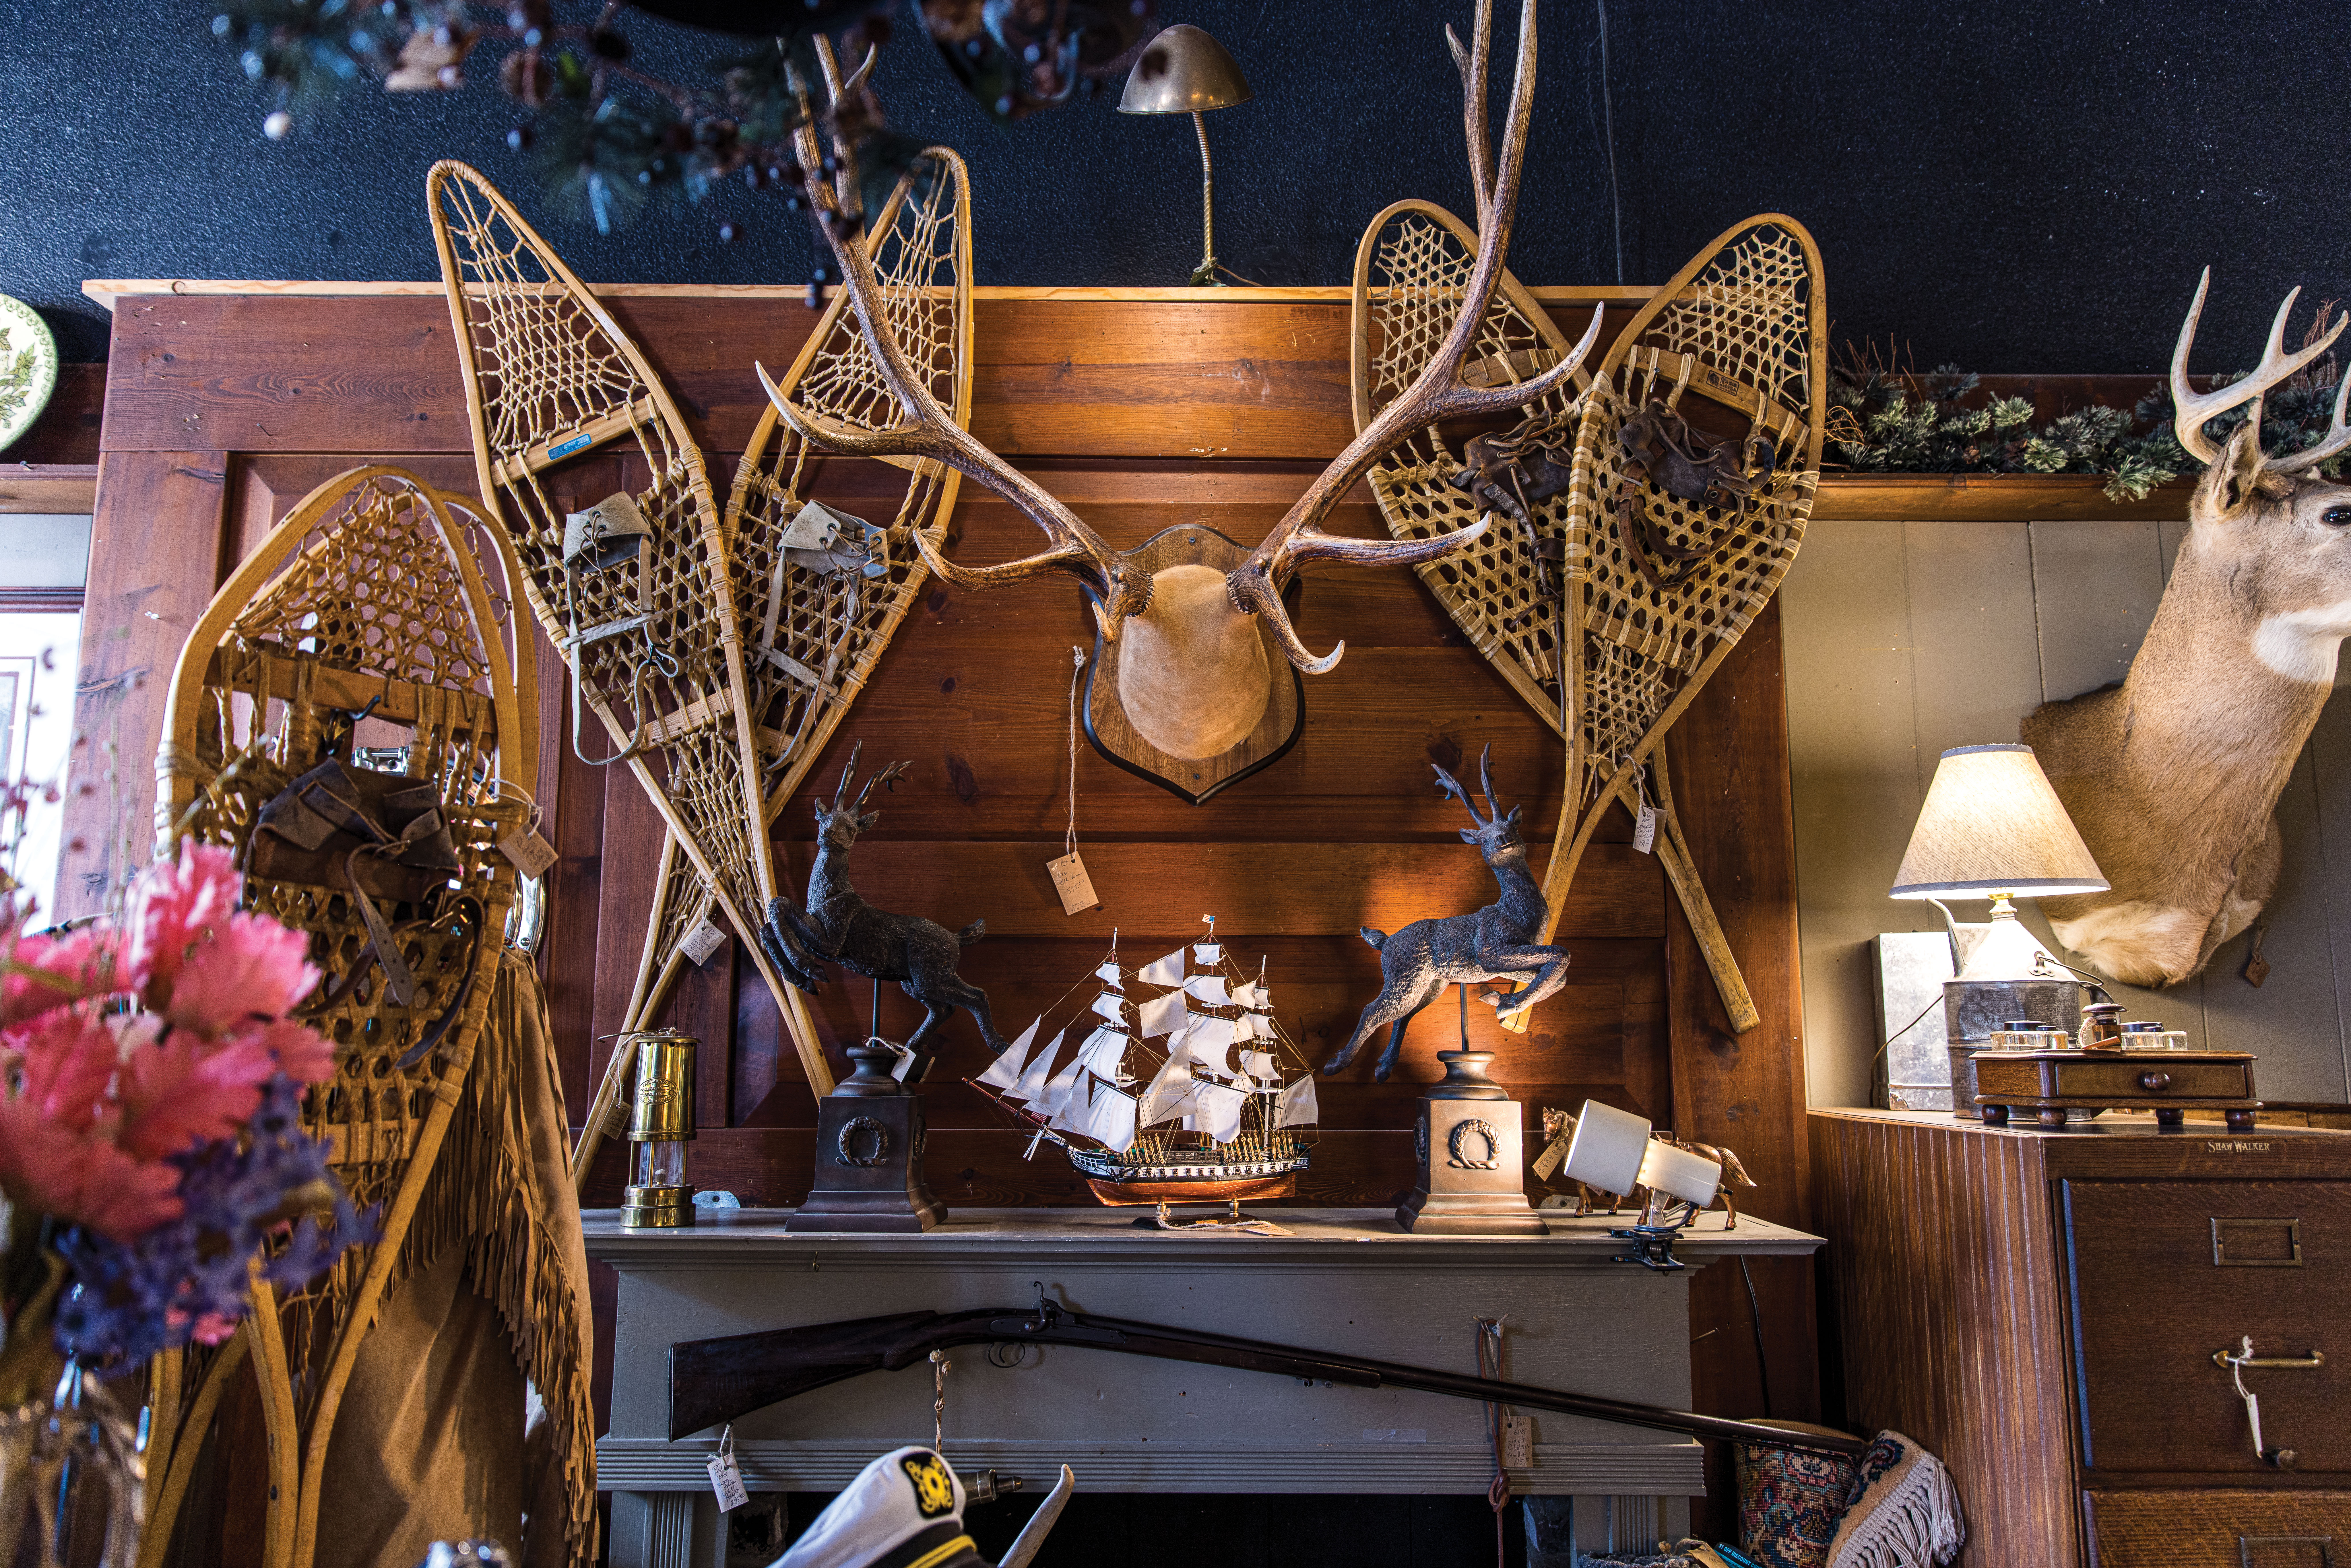 Hobbiests and sportsmen will find nods to their crafts and adventures at Look in Antiques.